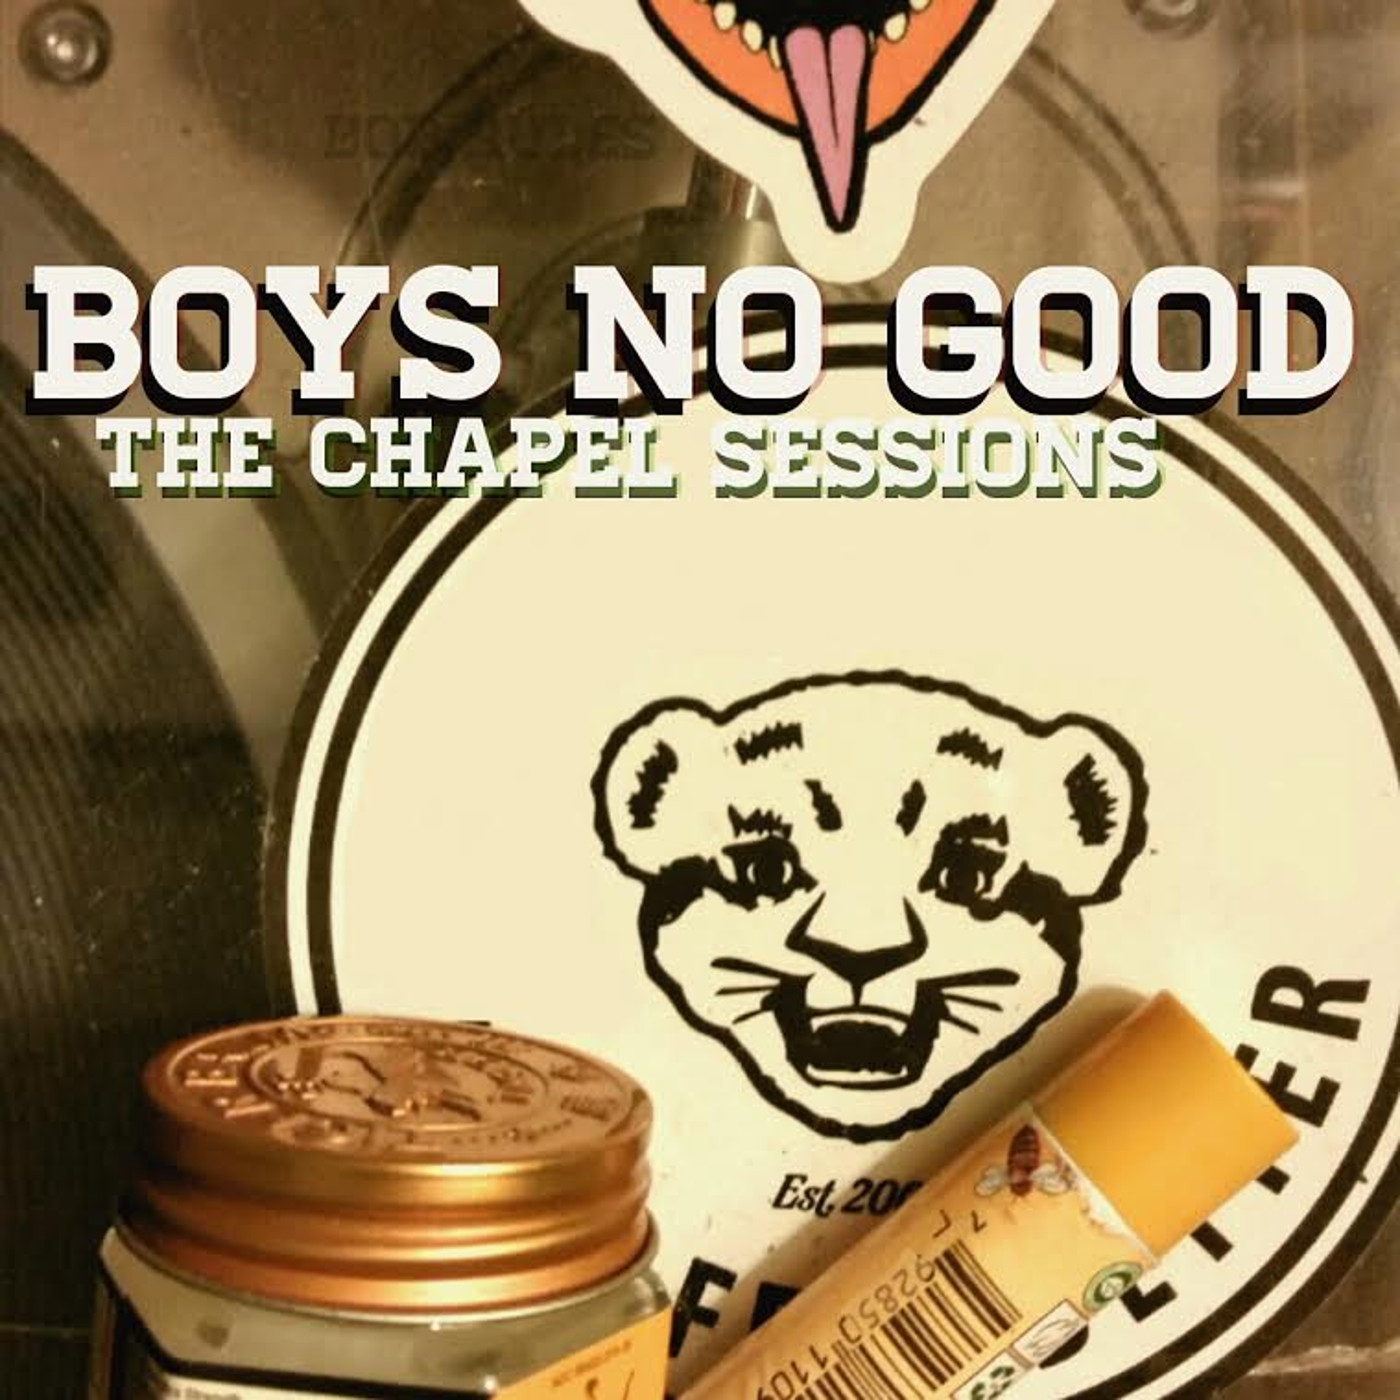 The Chapel Sessions